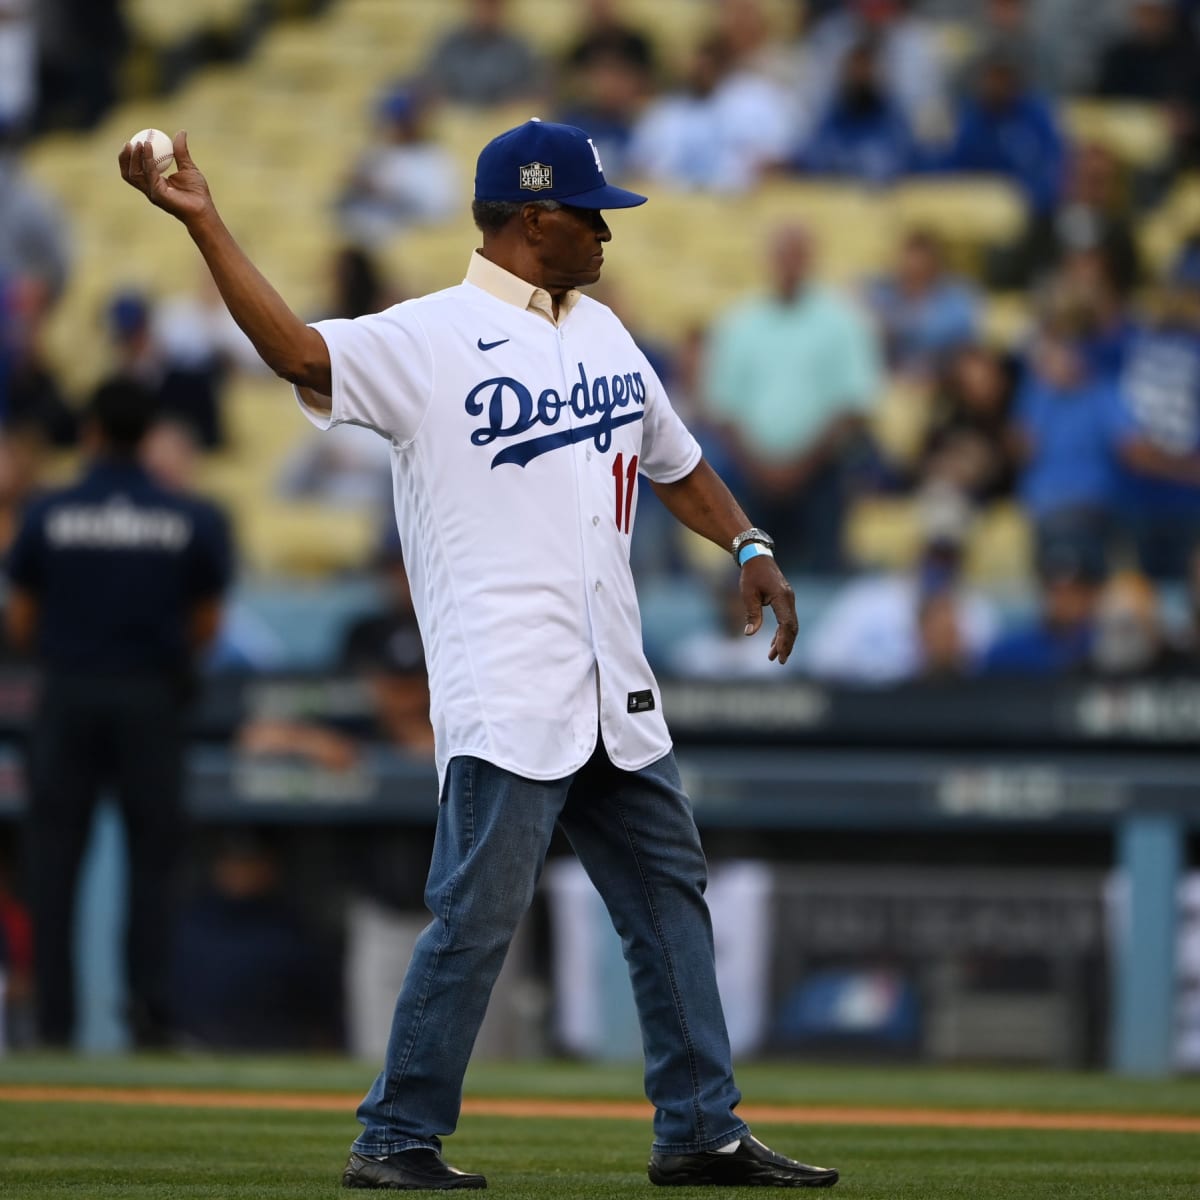 Manny Mota to be inducted into Legends of Dodger Baseball